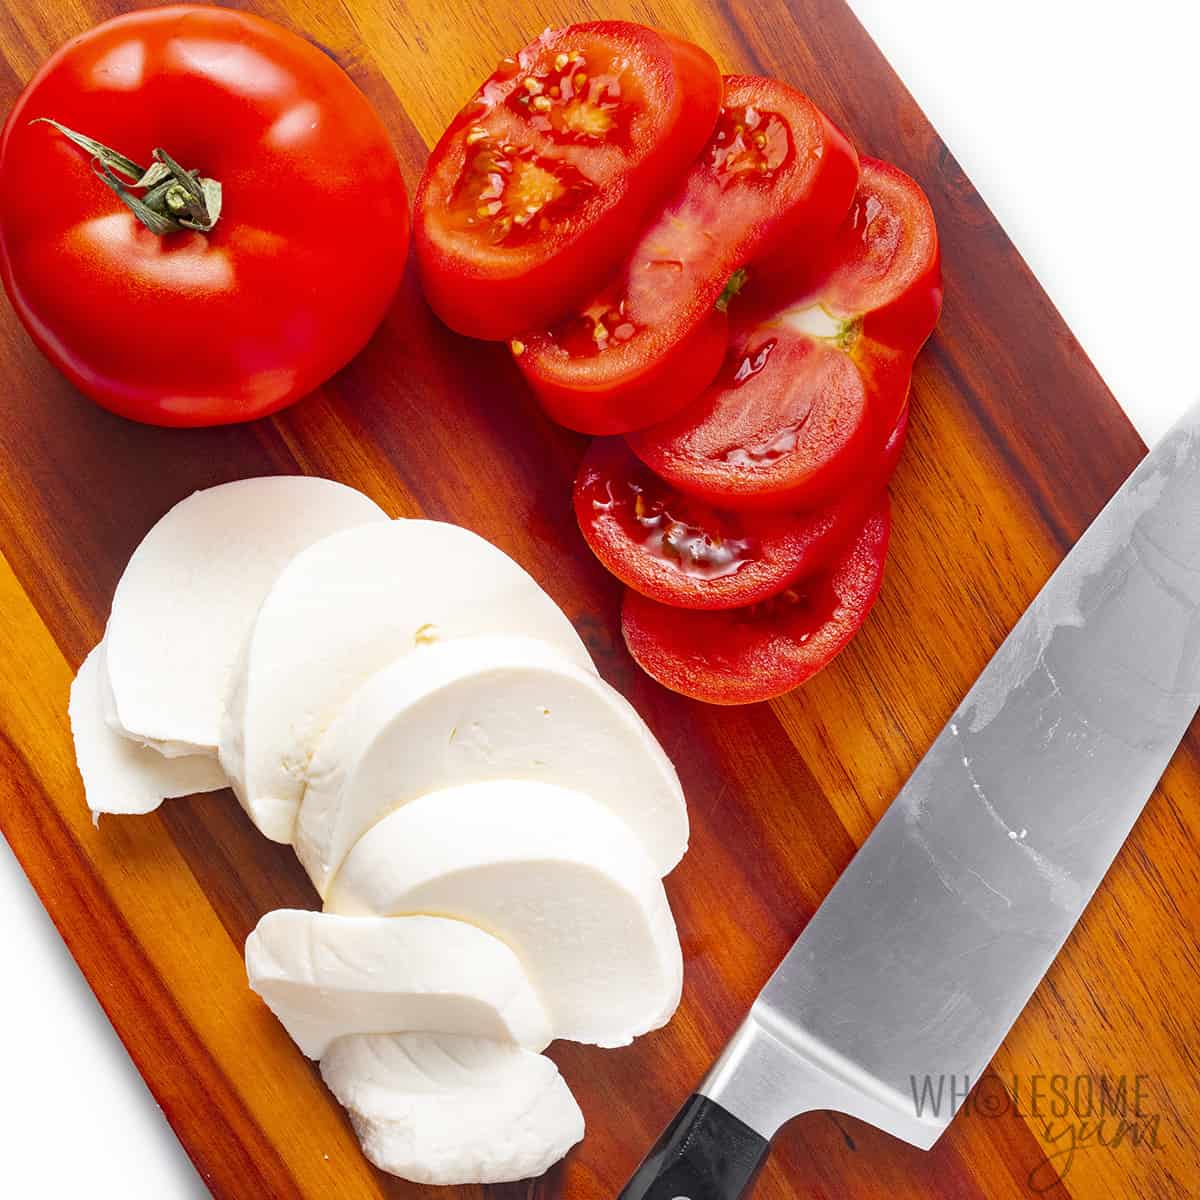 Sliced tomatoes and mozzarella on a cutting board.